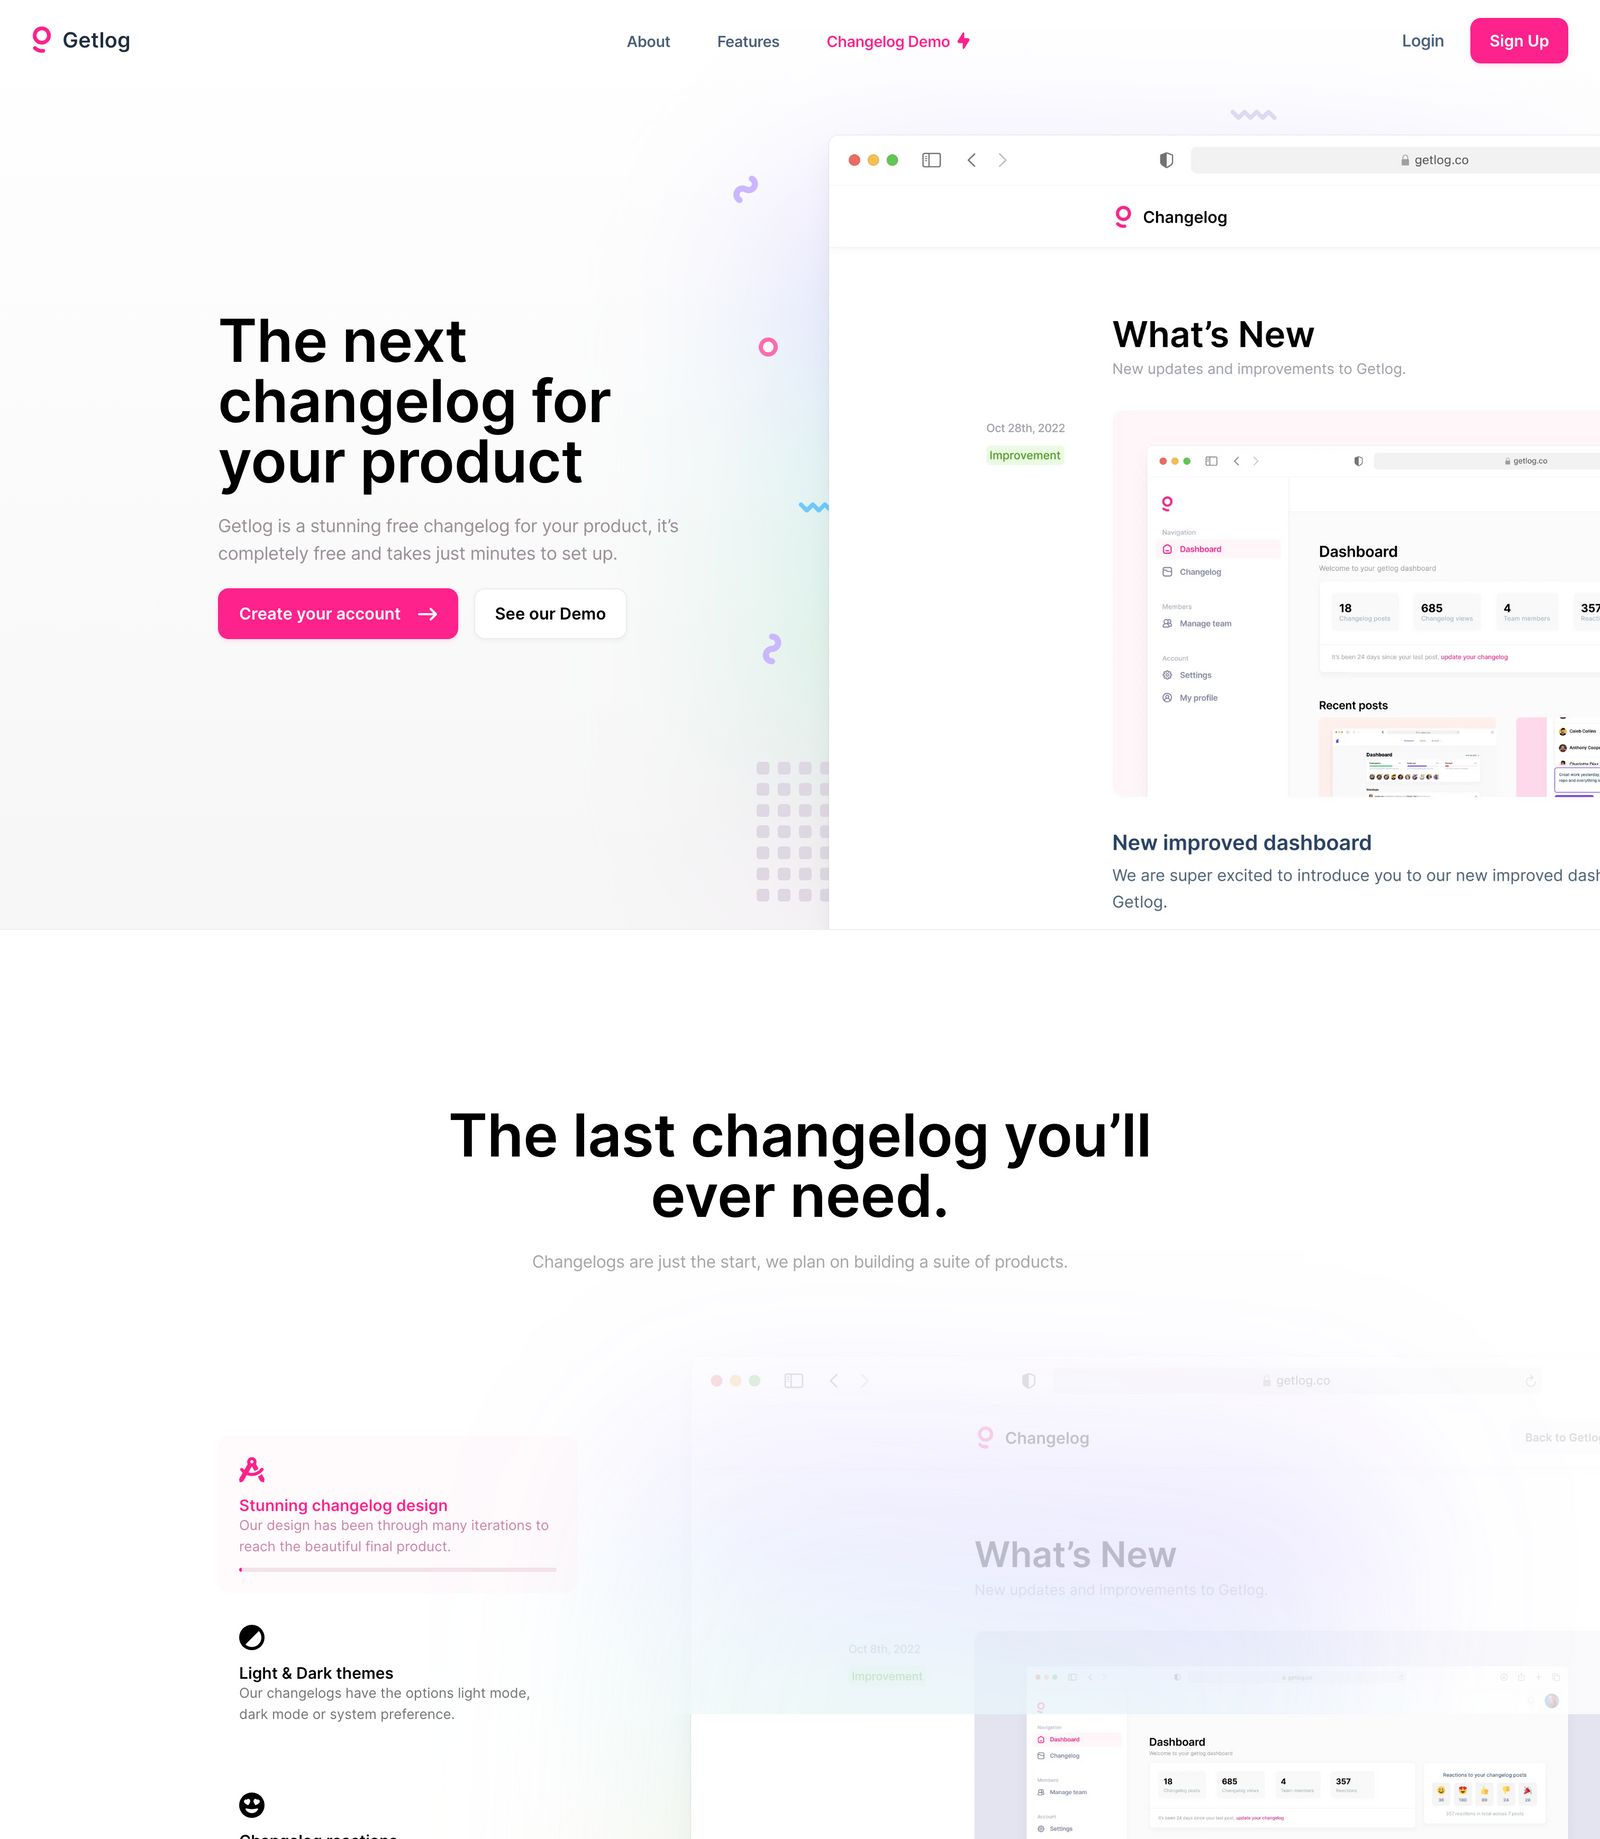 /articles/landing-page-inspiration/landing-page-design-example-4.jpg)_Saas Landing page example from Getlog